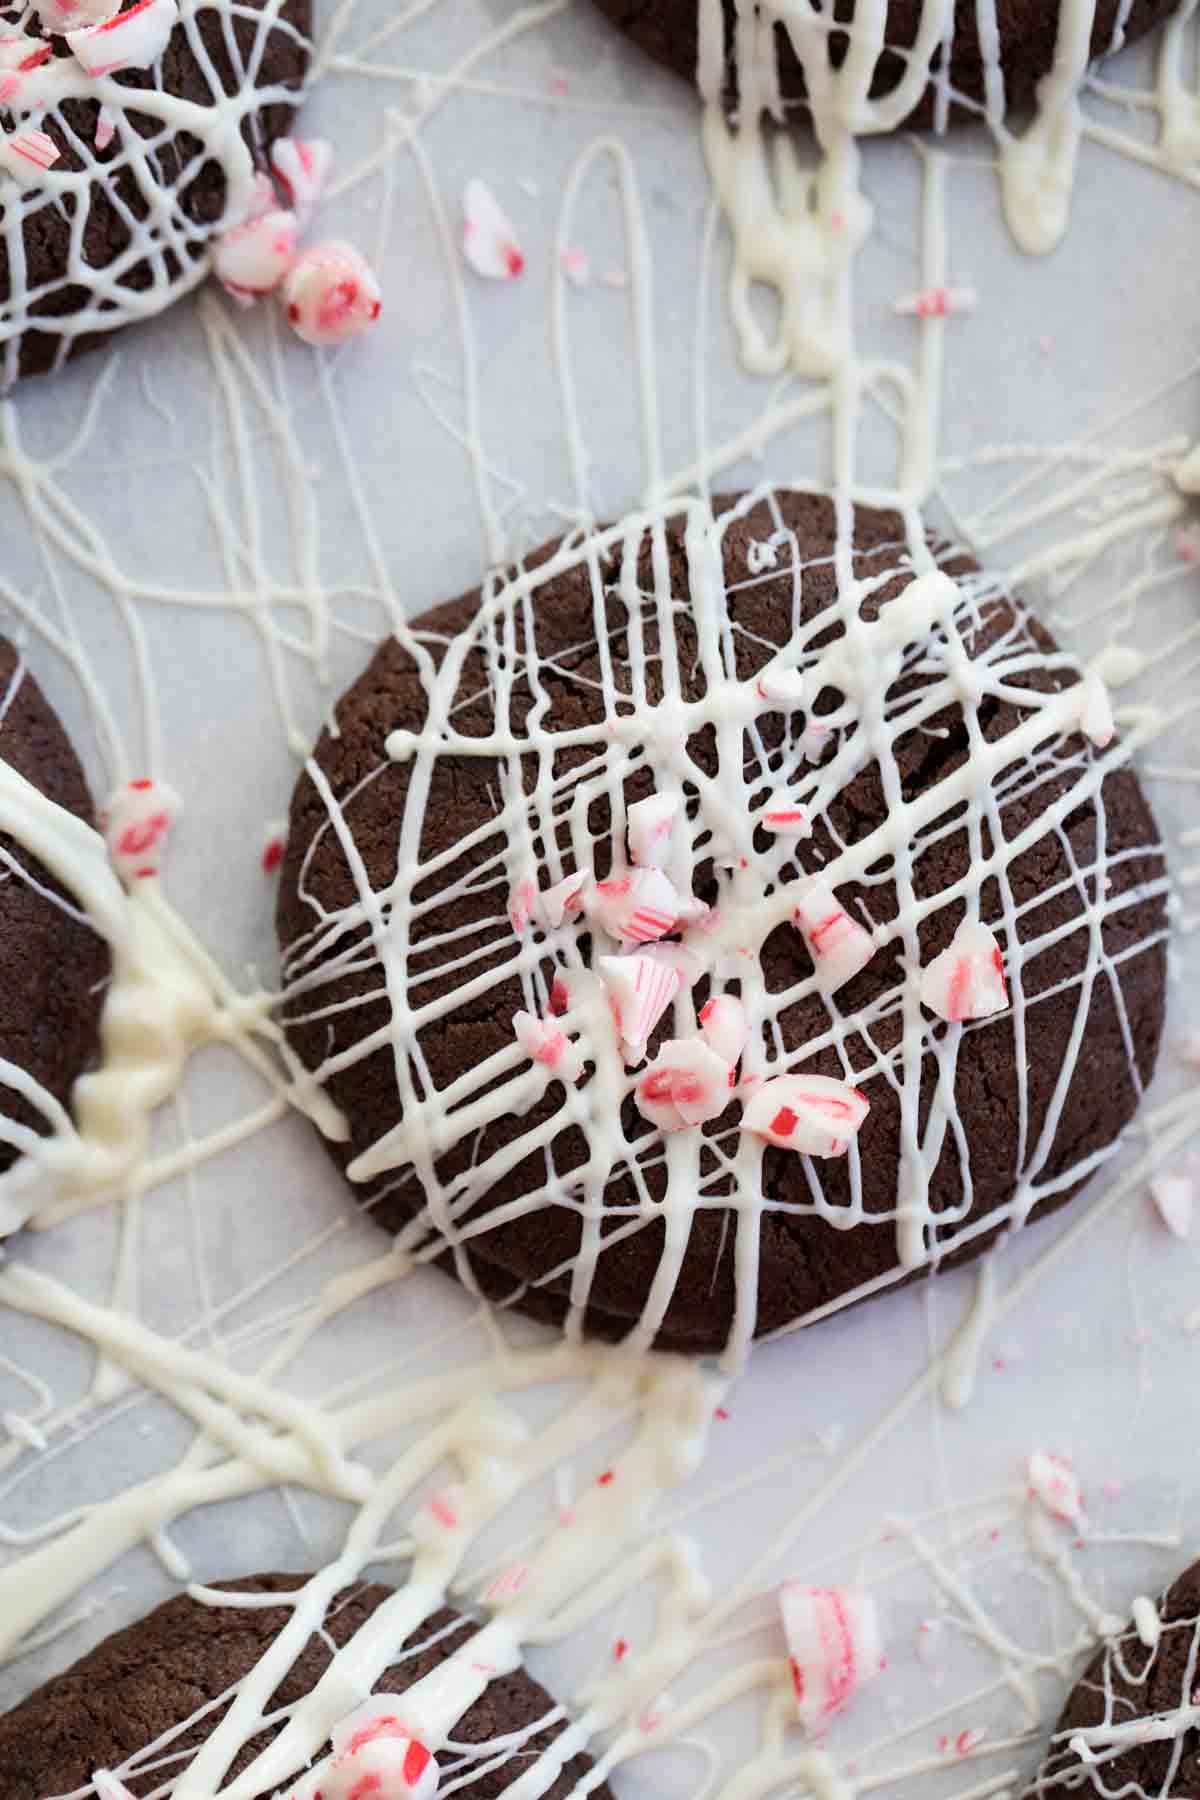 Chocolate Peppermint Christmas Cookies stuffed with a peppermint patty.